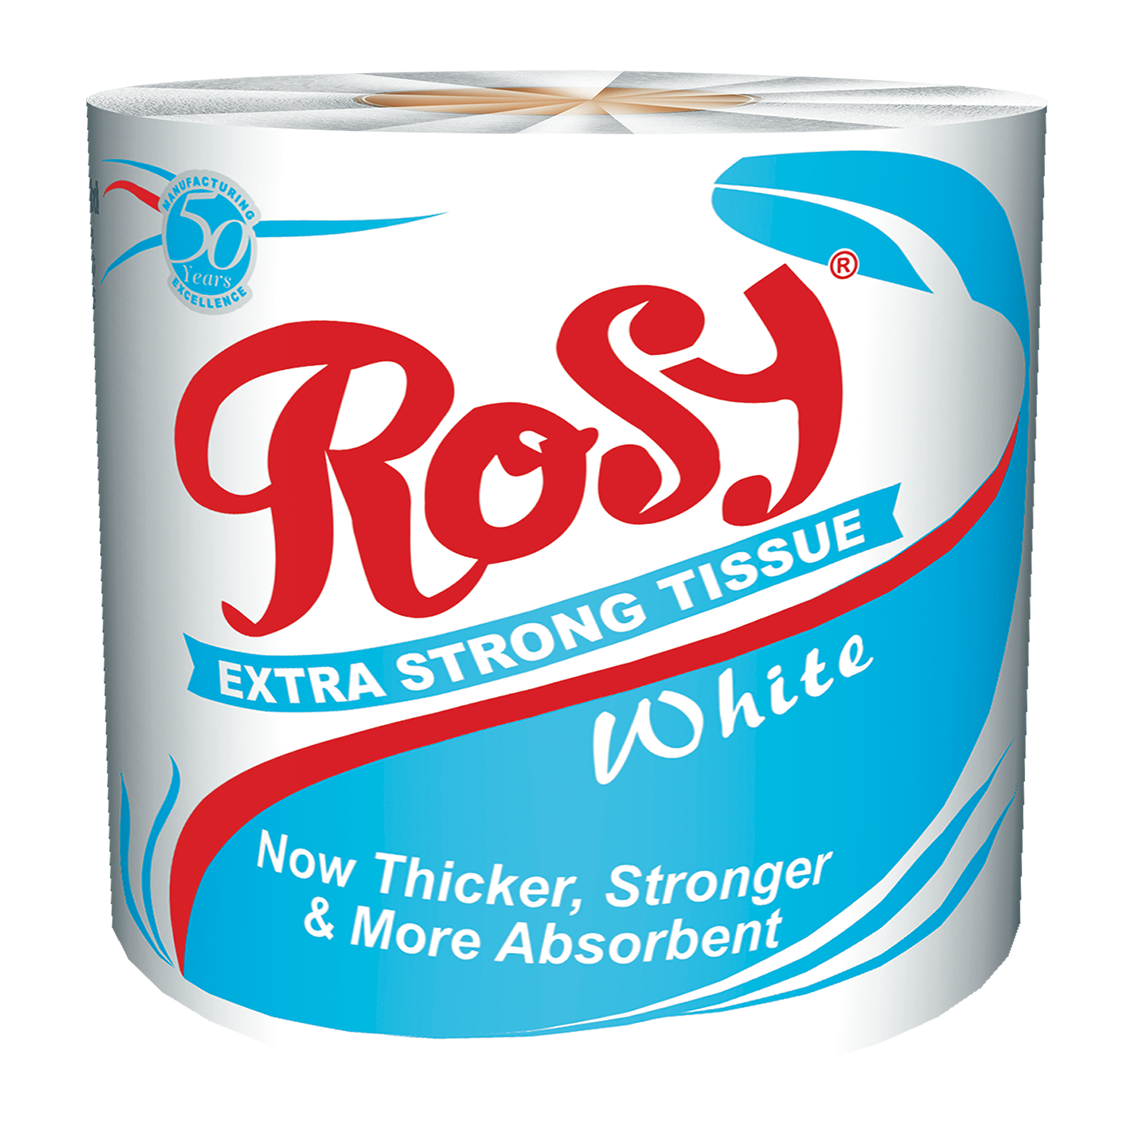 ROSY-PLASTIC-ROLL.png - 770.710.5 kb